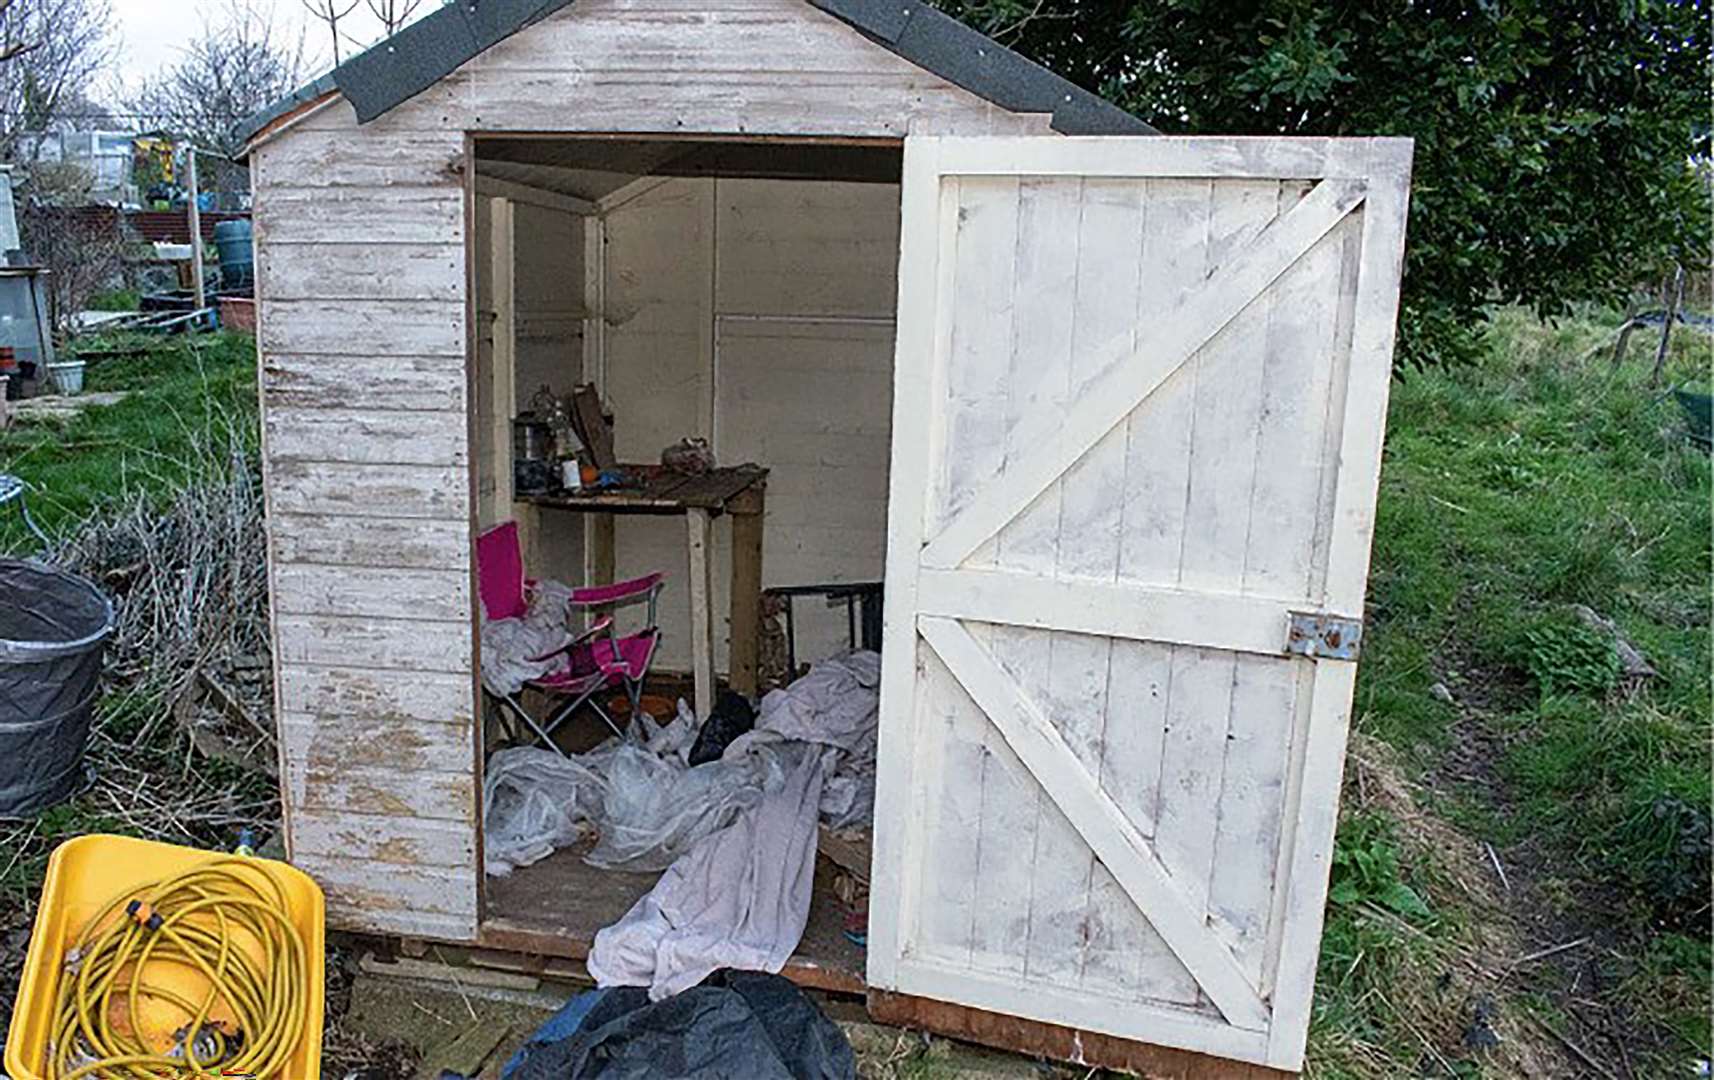 A shed in Lower Roedale Allotments, East Sussex, where a Lidl bag was found to contain the body of Victoria (Met Police/PA)